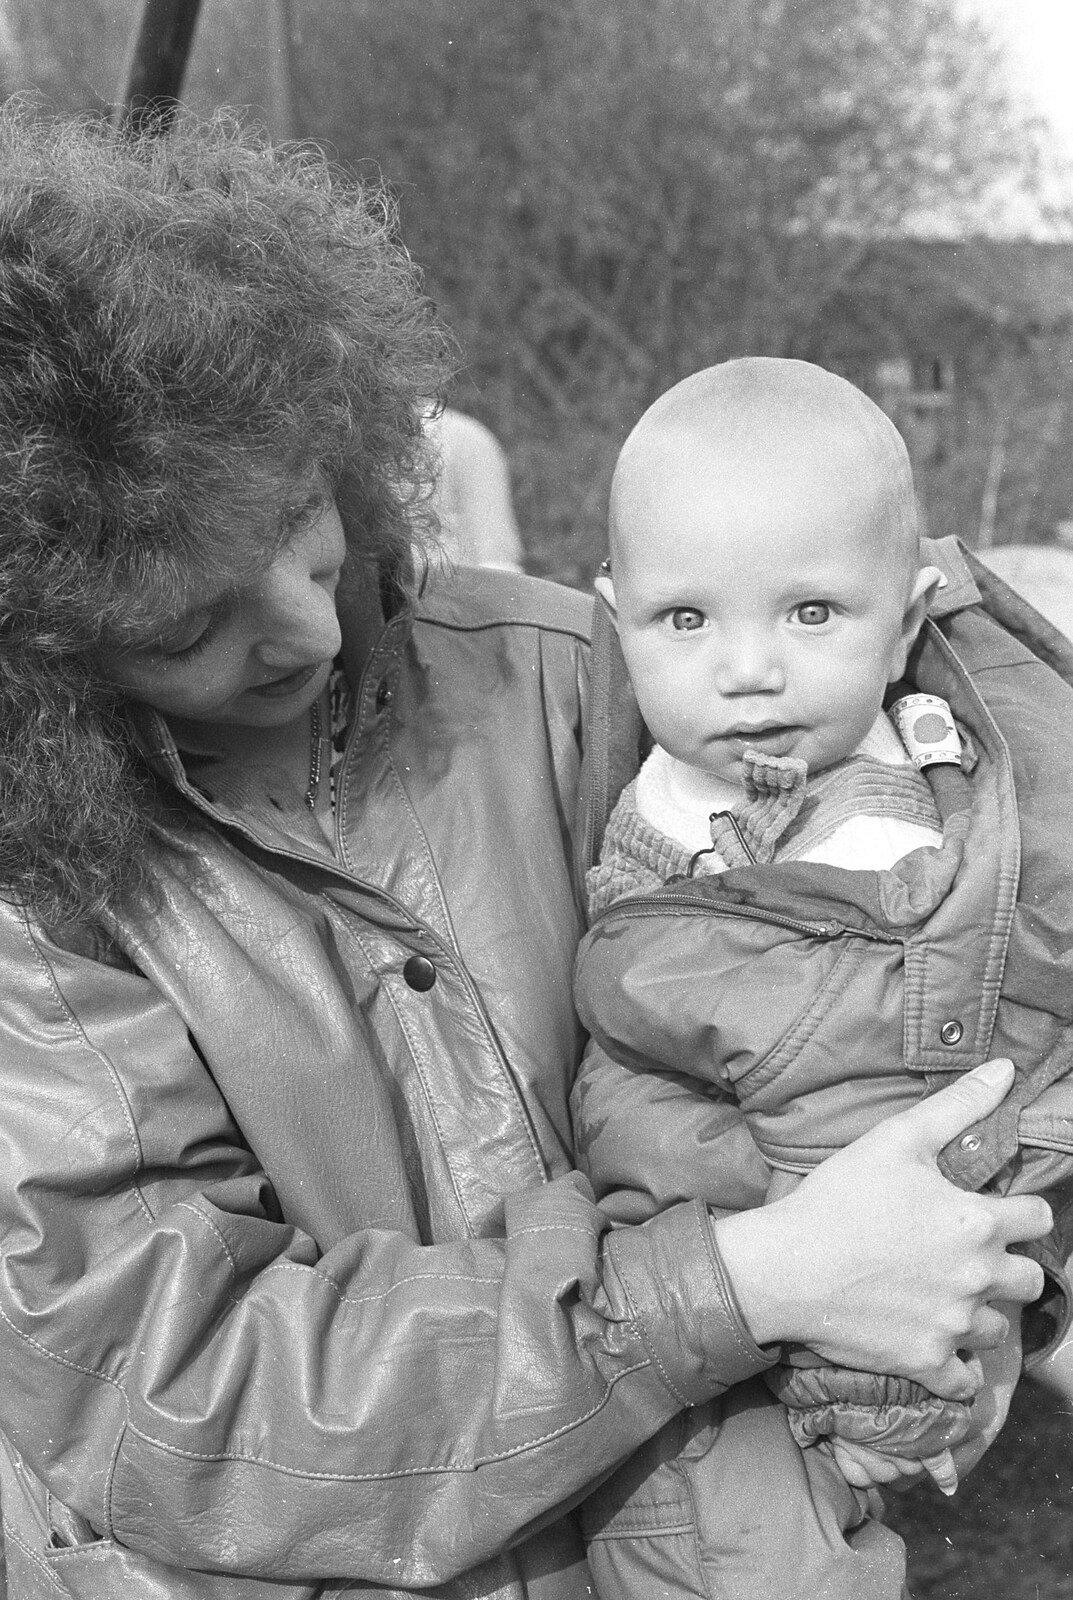 Monique's baby from Cider Making in Black and White, Stuston, Suffolk - 11th October 1992